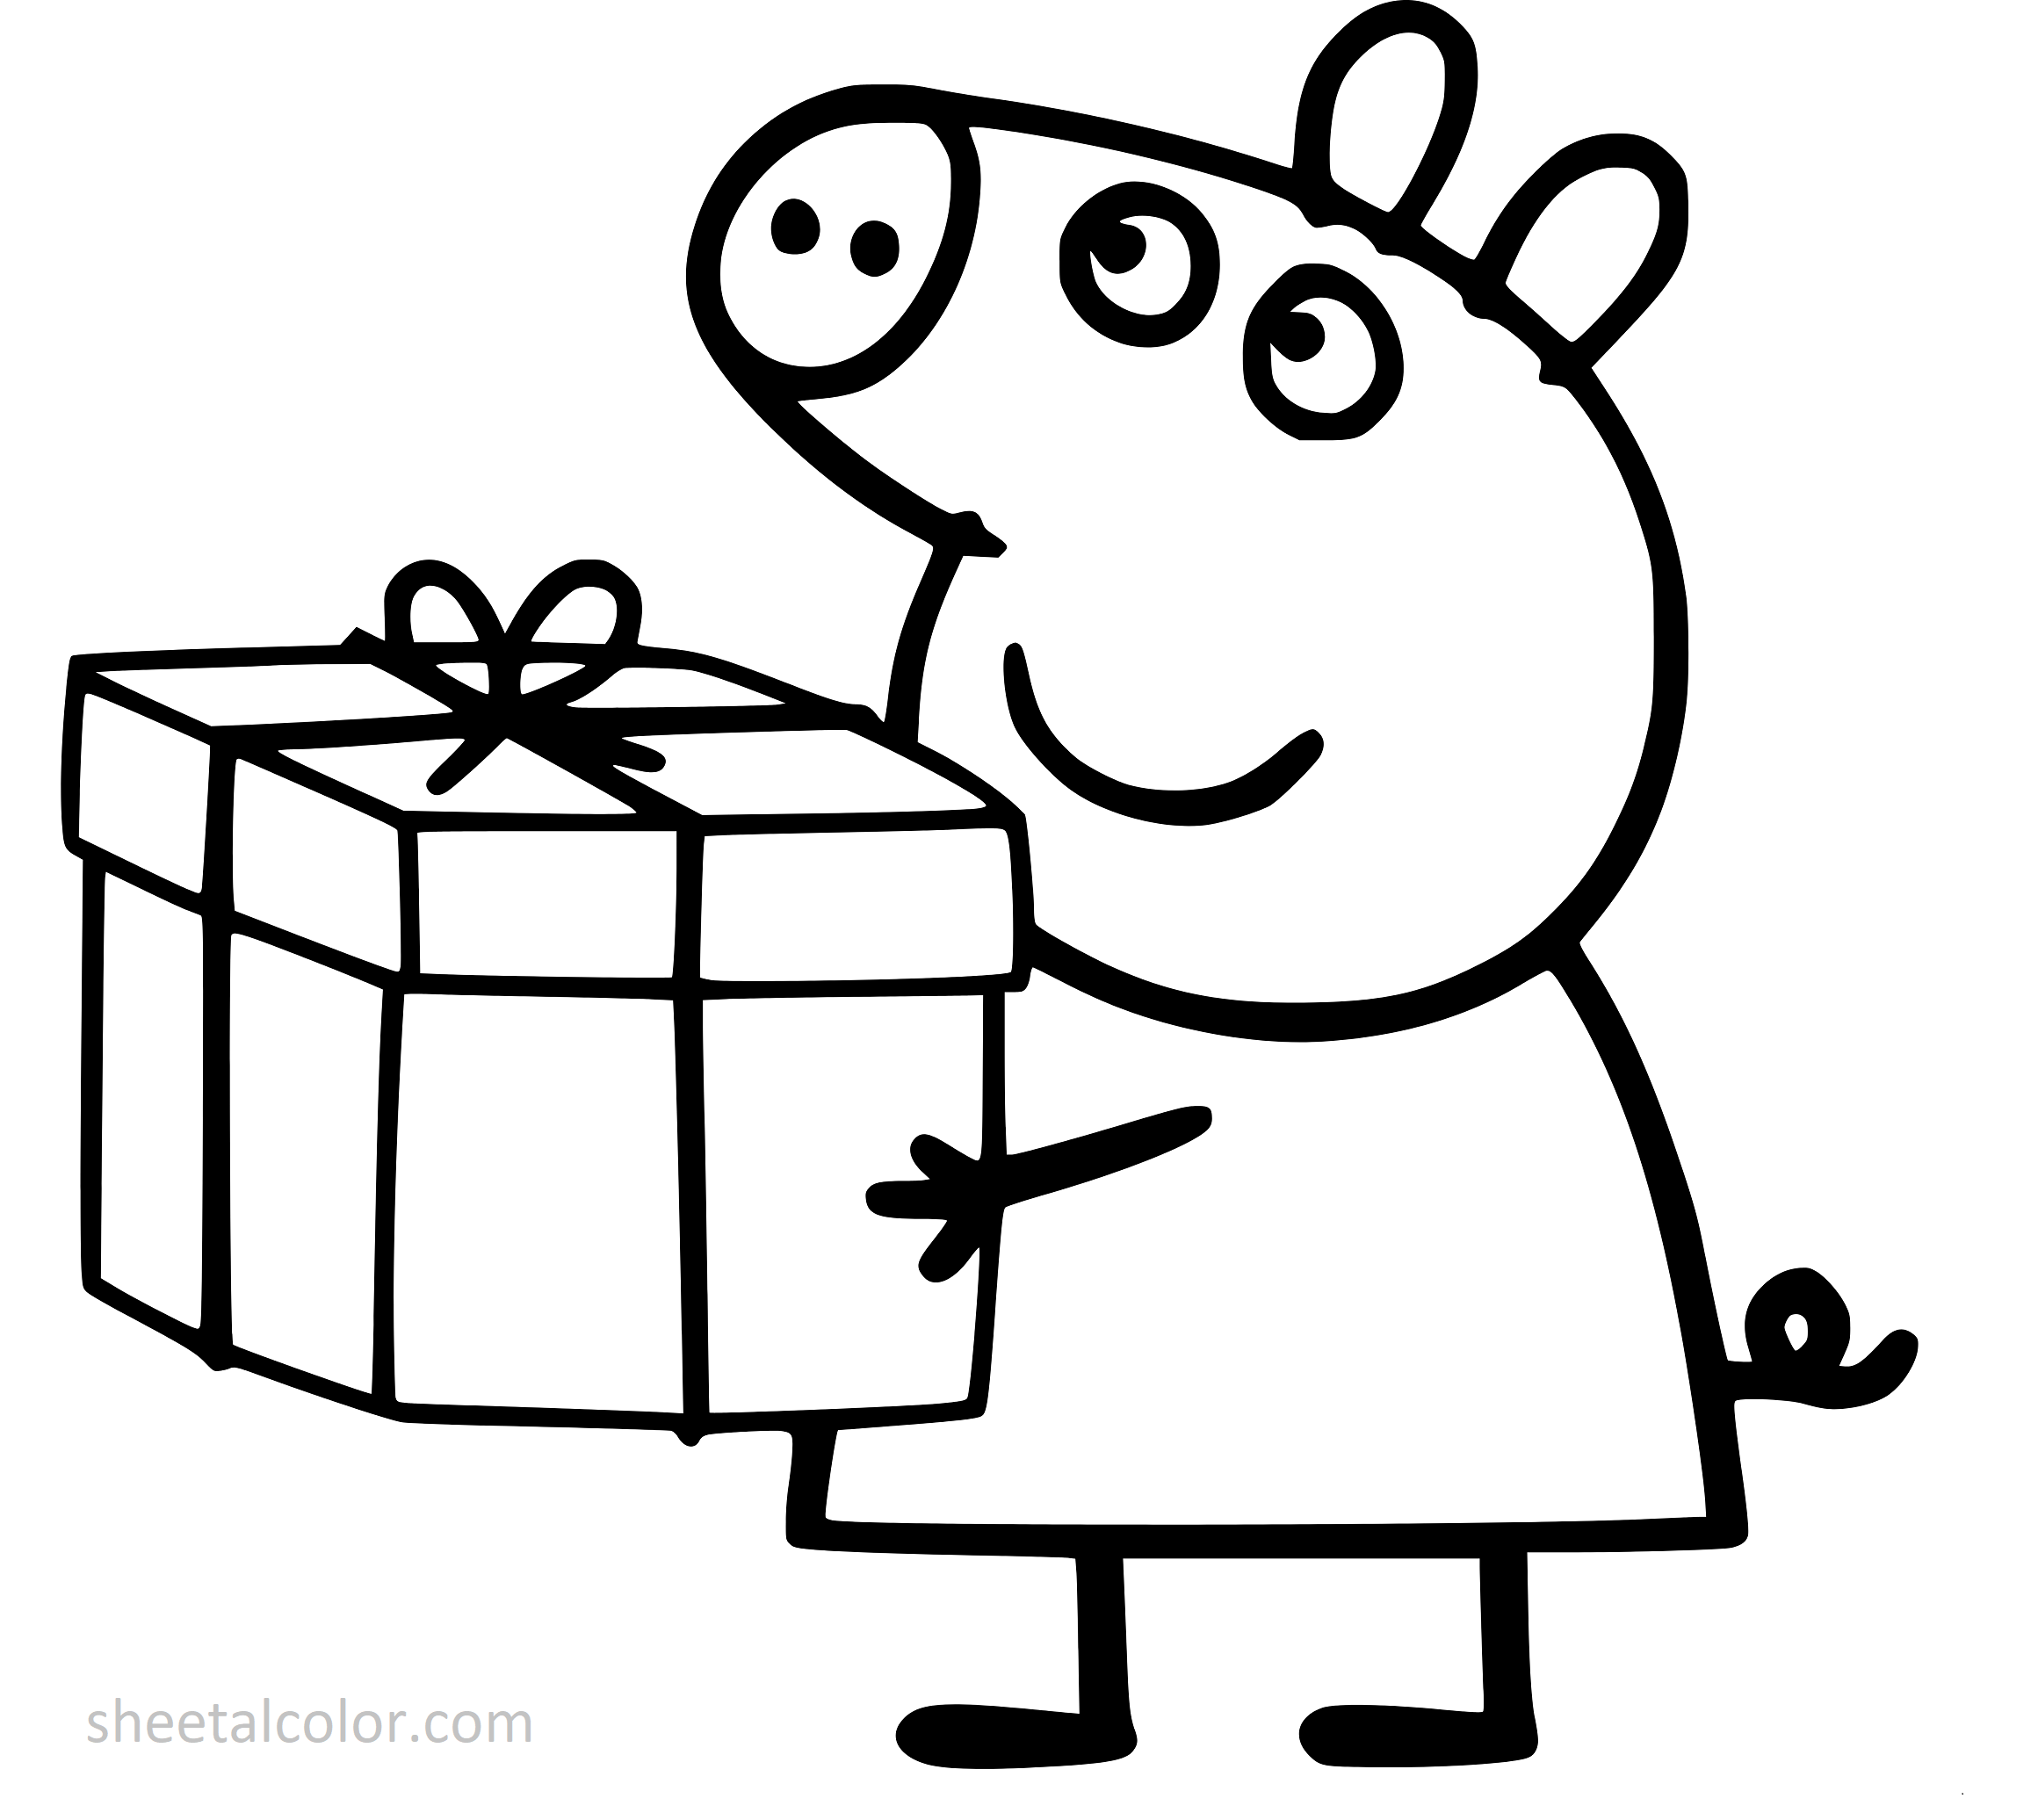 Peppa's Gift Coloring Page for Kids - SheetalColor.com